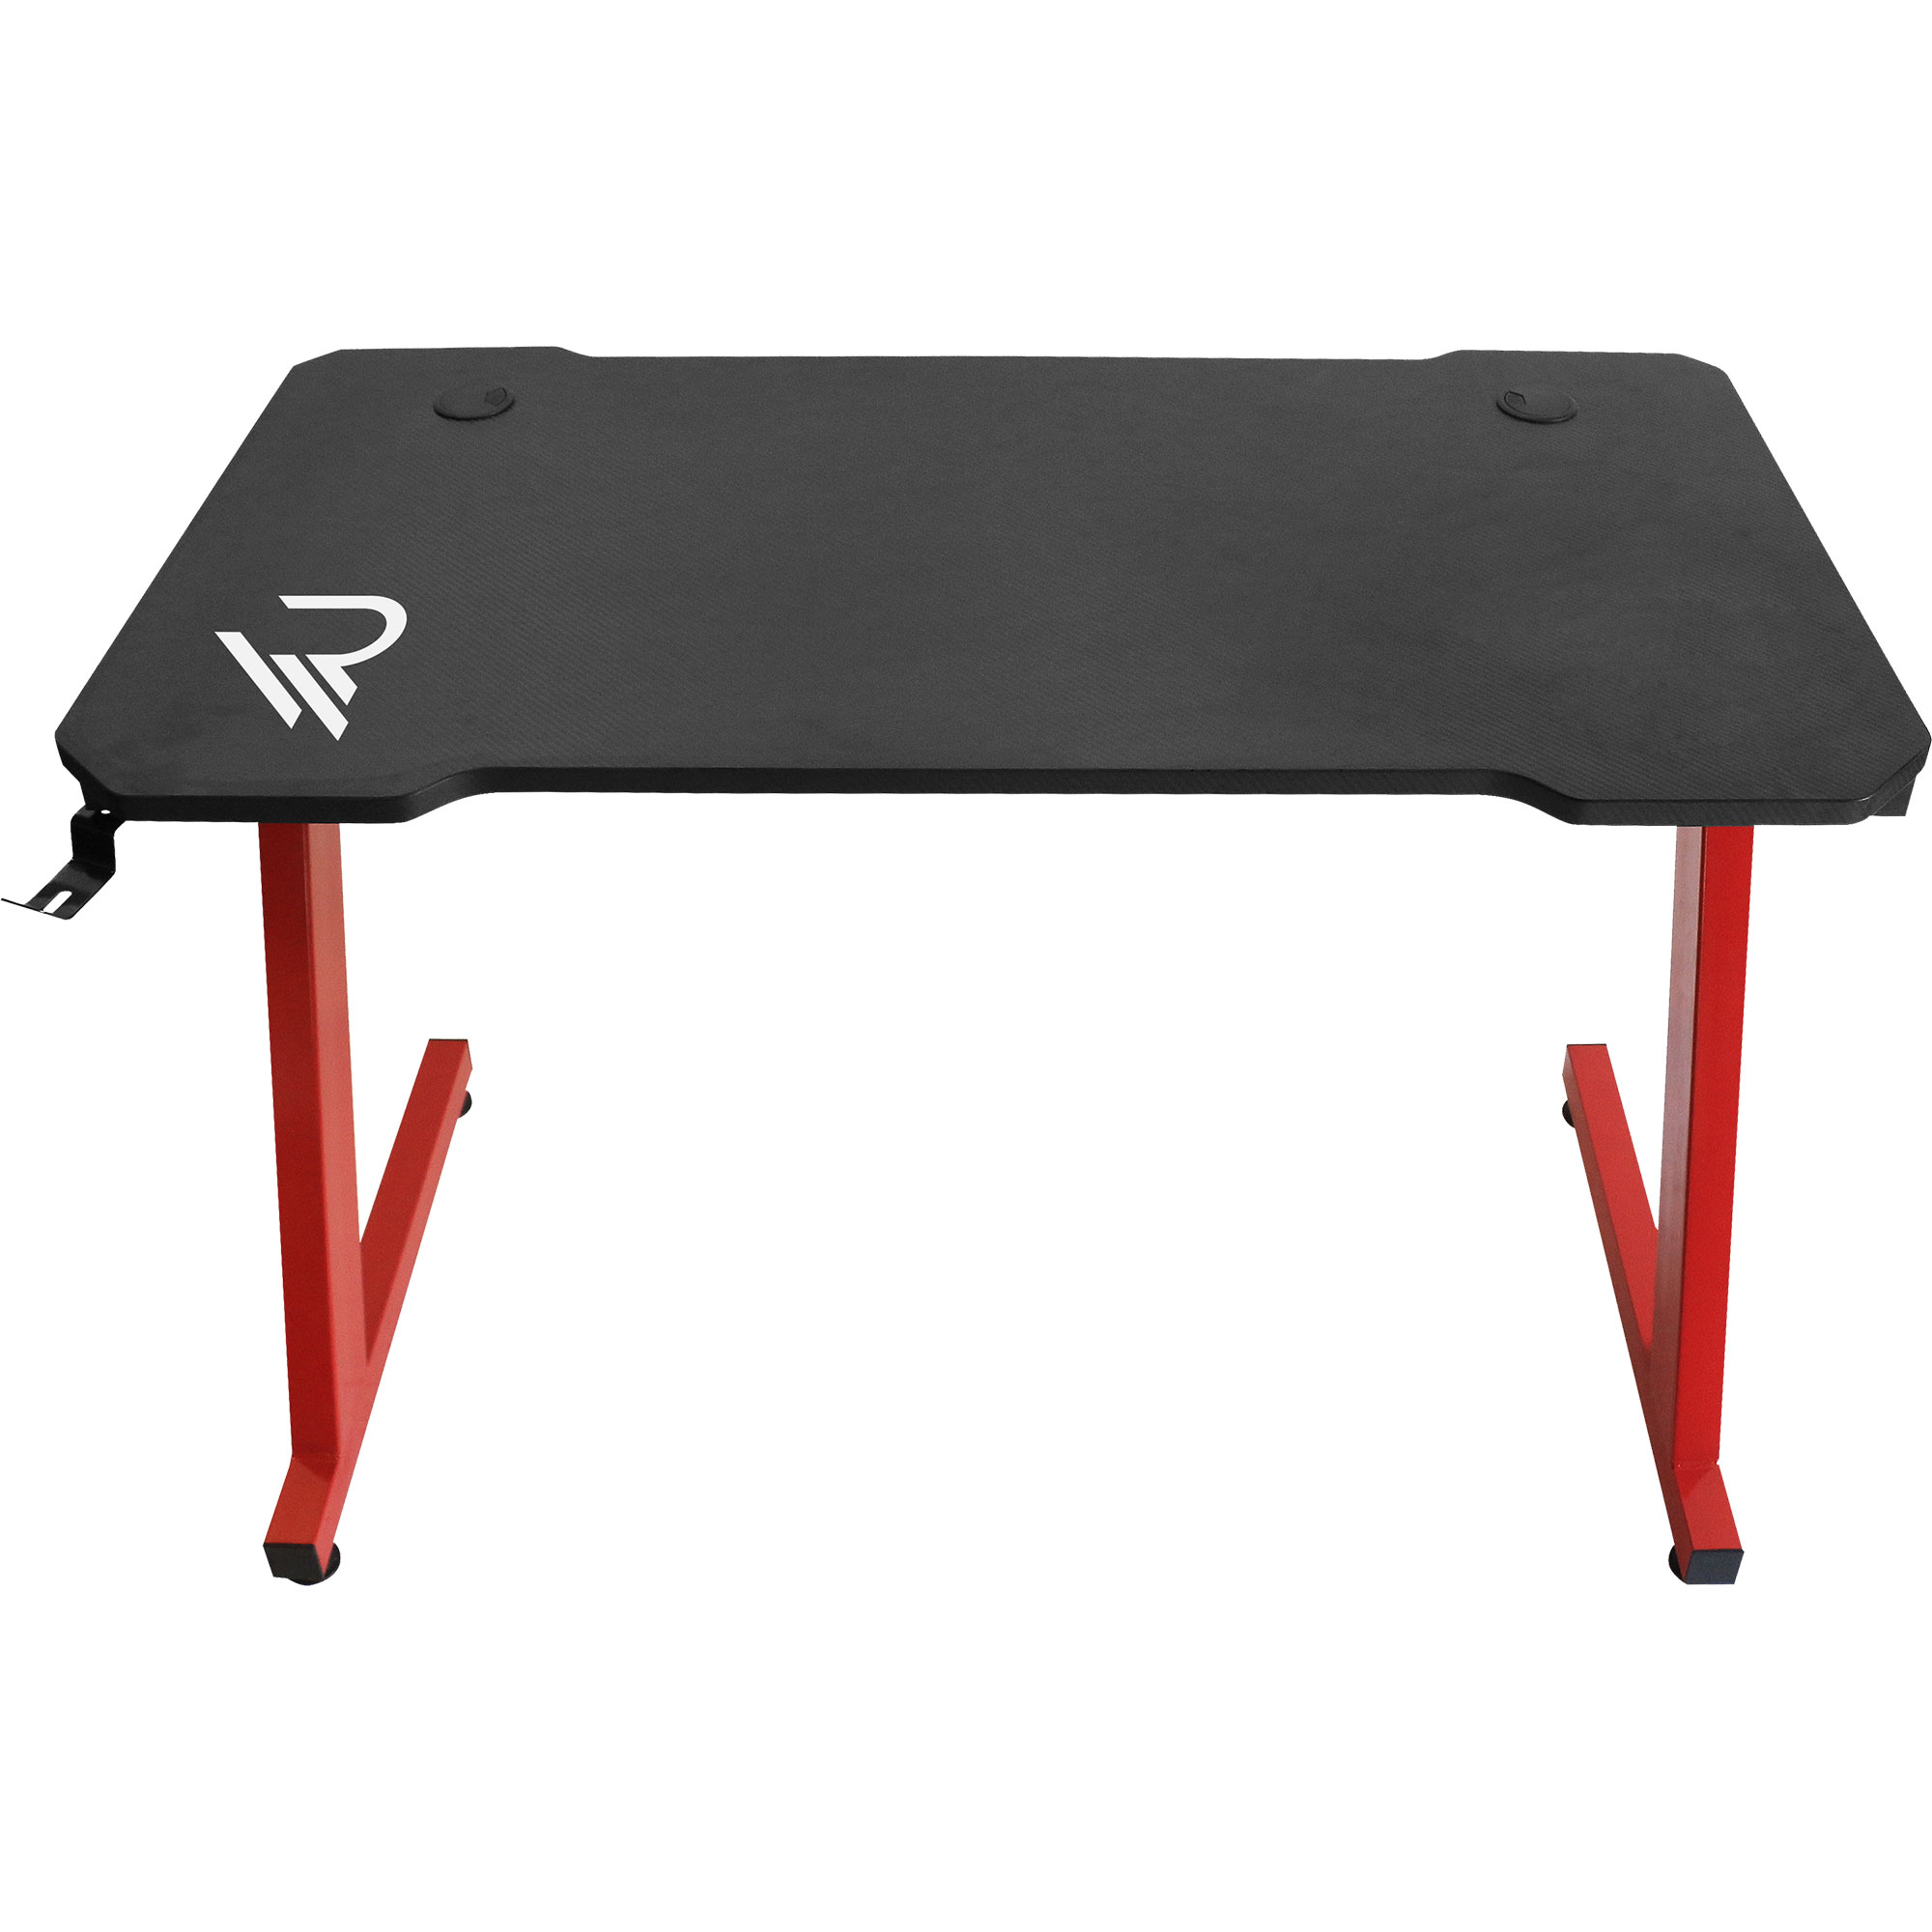 Gamer Desk With Carbon Finish | Subsonic